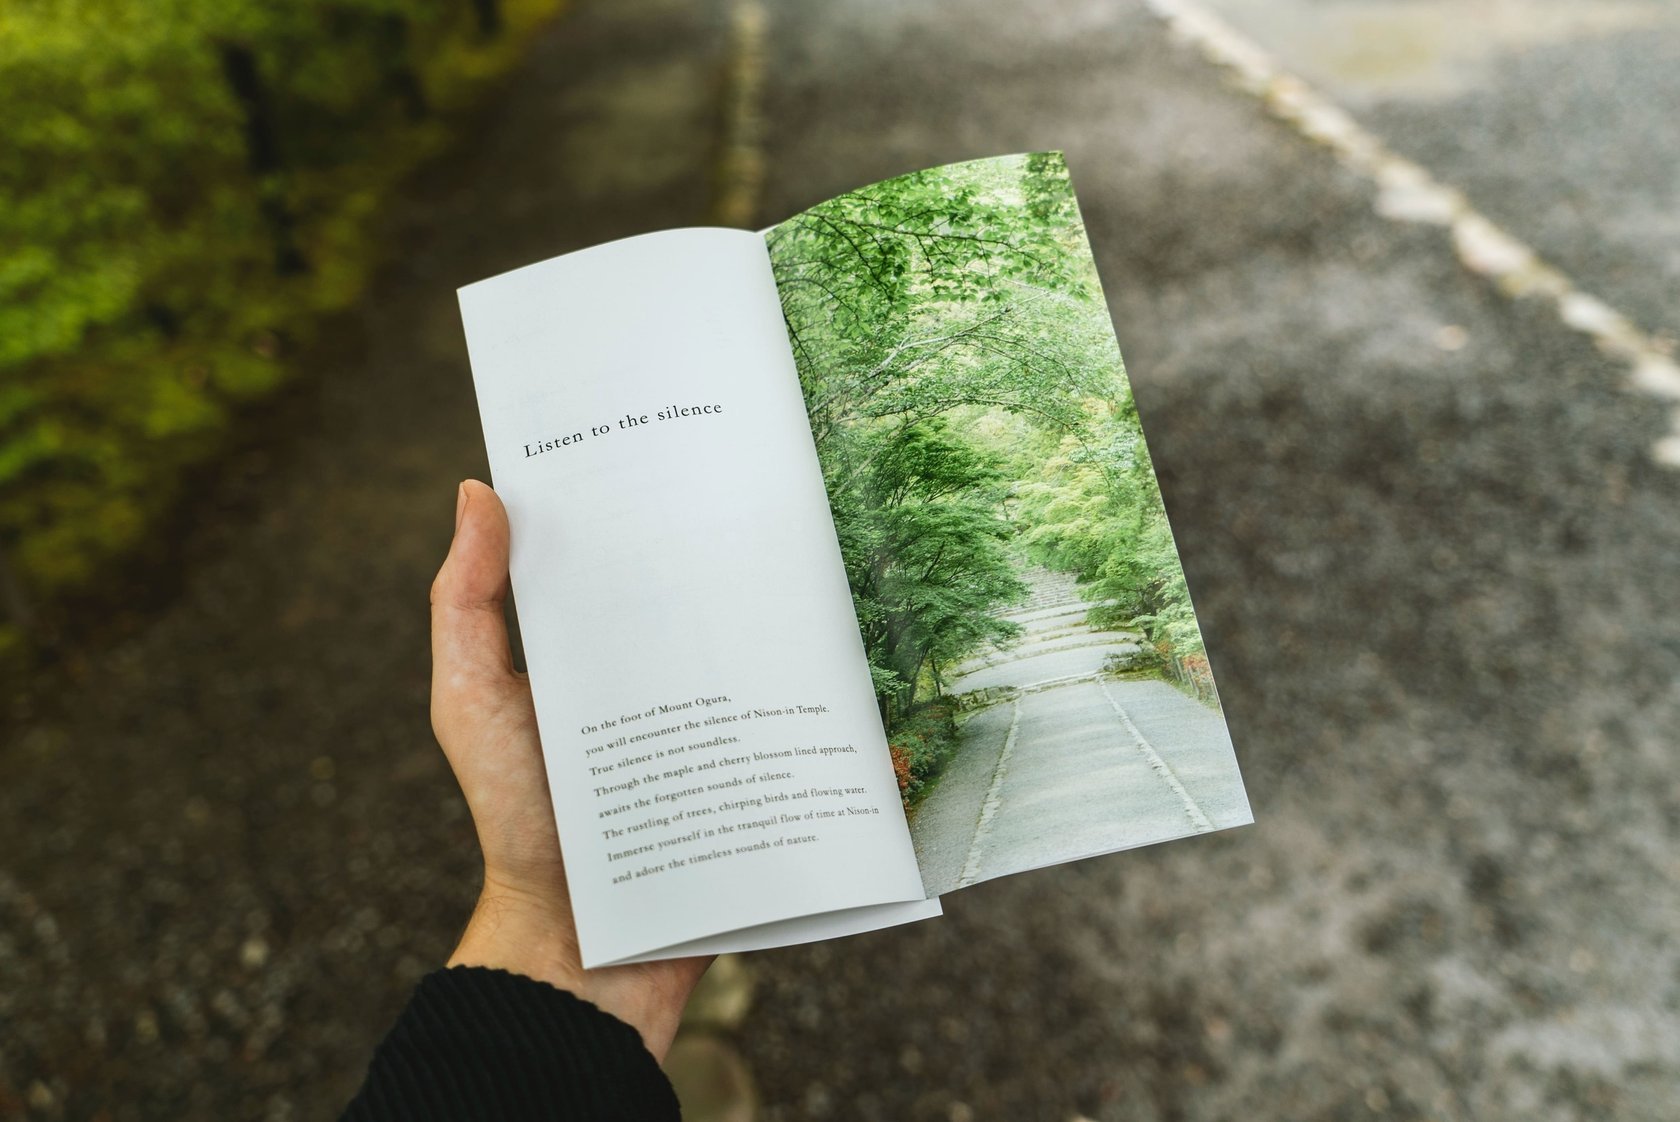 Tip on Creating a Travel Photo Book